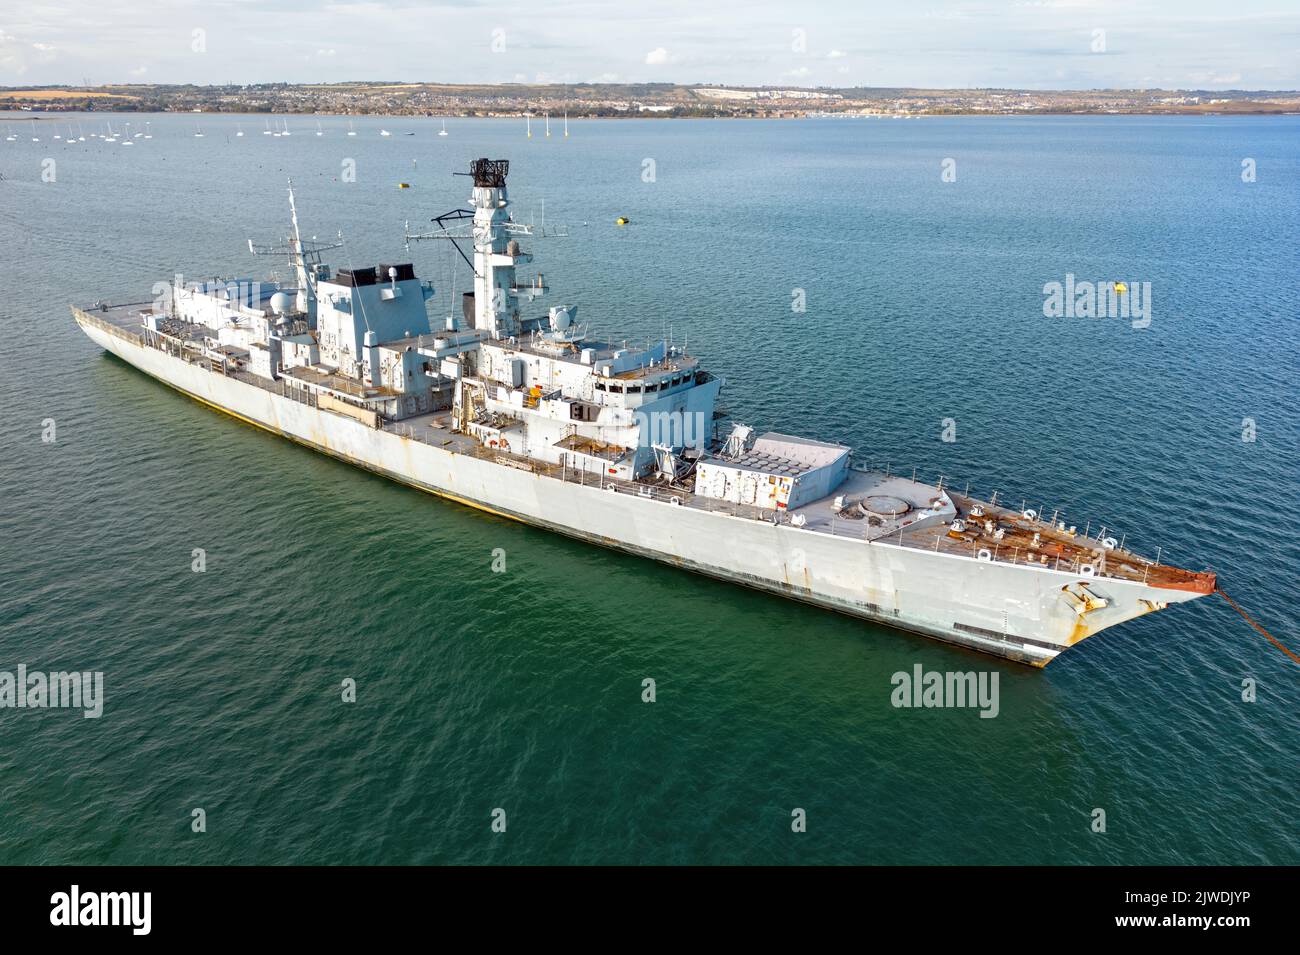 The former HMS Monmouth, a decommissioned Type 23 frigate, awaiting disposal in Portsmouth Harbour. Stock Photo